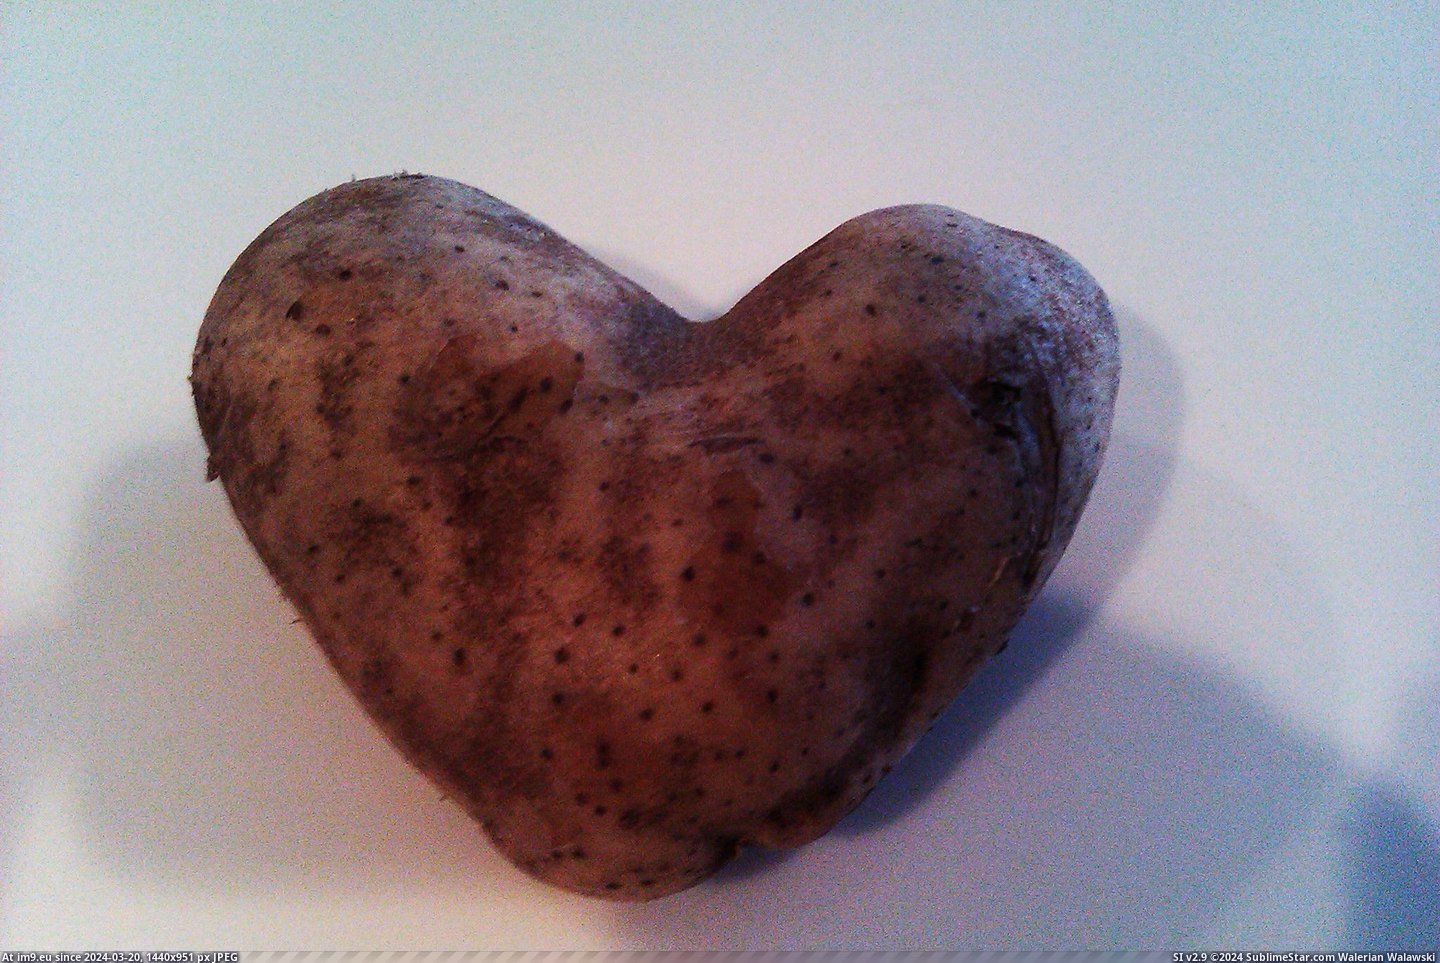 #One #Two #Potatoes #Fused #Heart #Kind [Mildlyinteresting] I found two potatoes fused into one and it looks kind of like a heart I think? Pic. (Image of album My r/MILDLYINTERESTING favs))